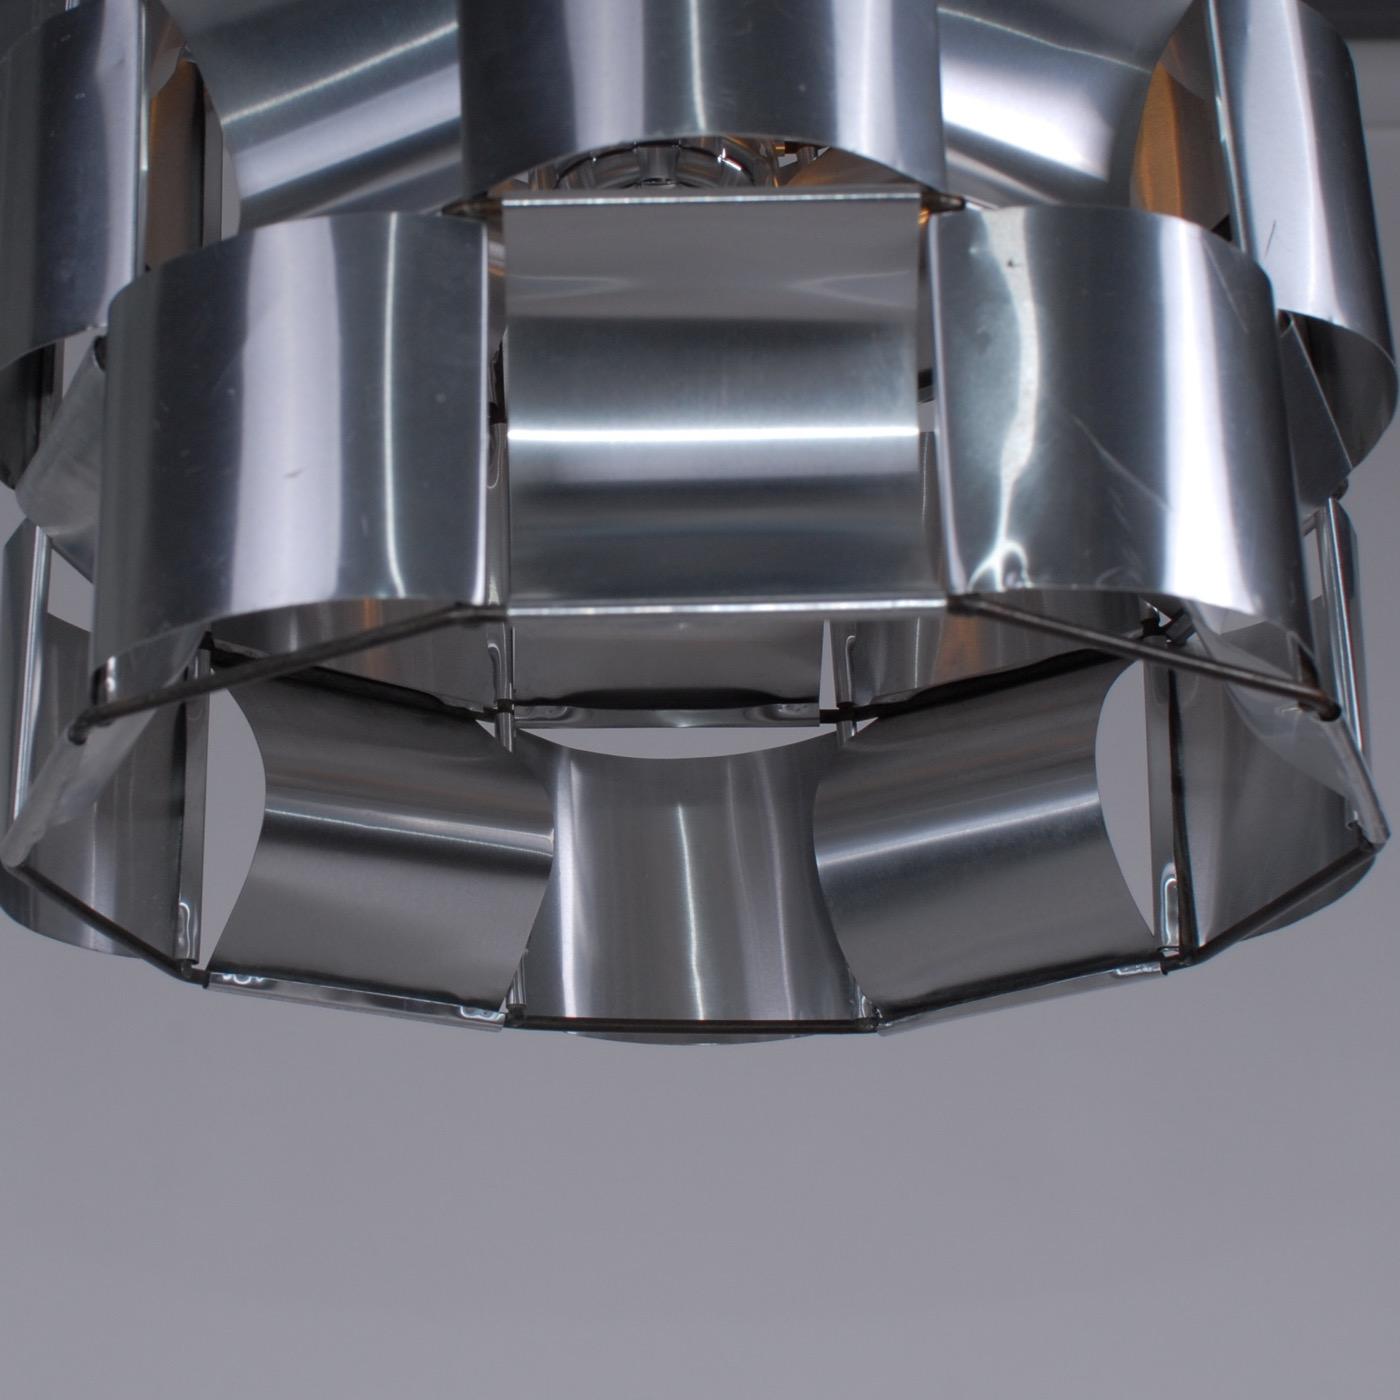 20th Century French Space Age Max Sauze Aluminium Silver Ceiling Lamp 1970s Early Production